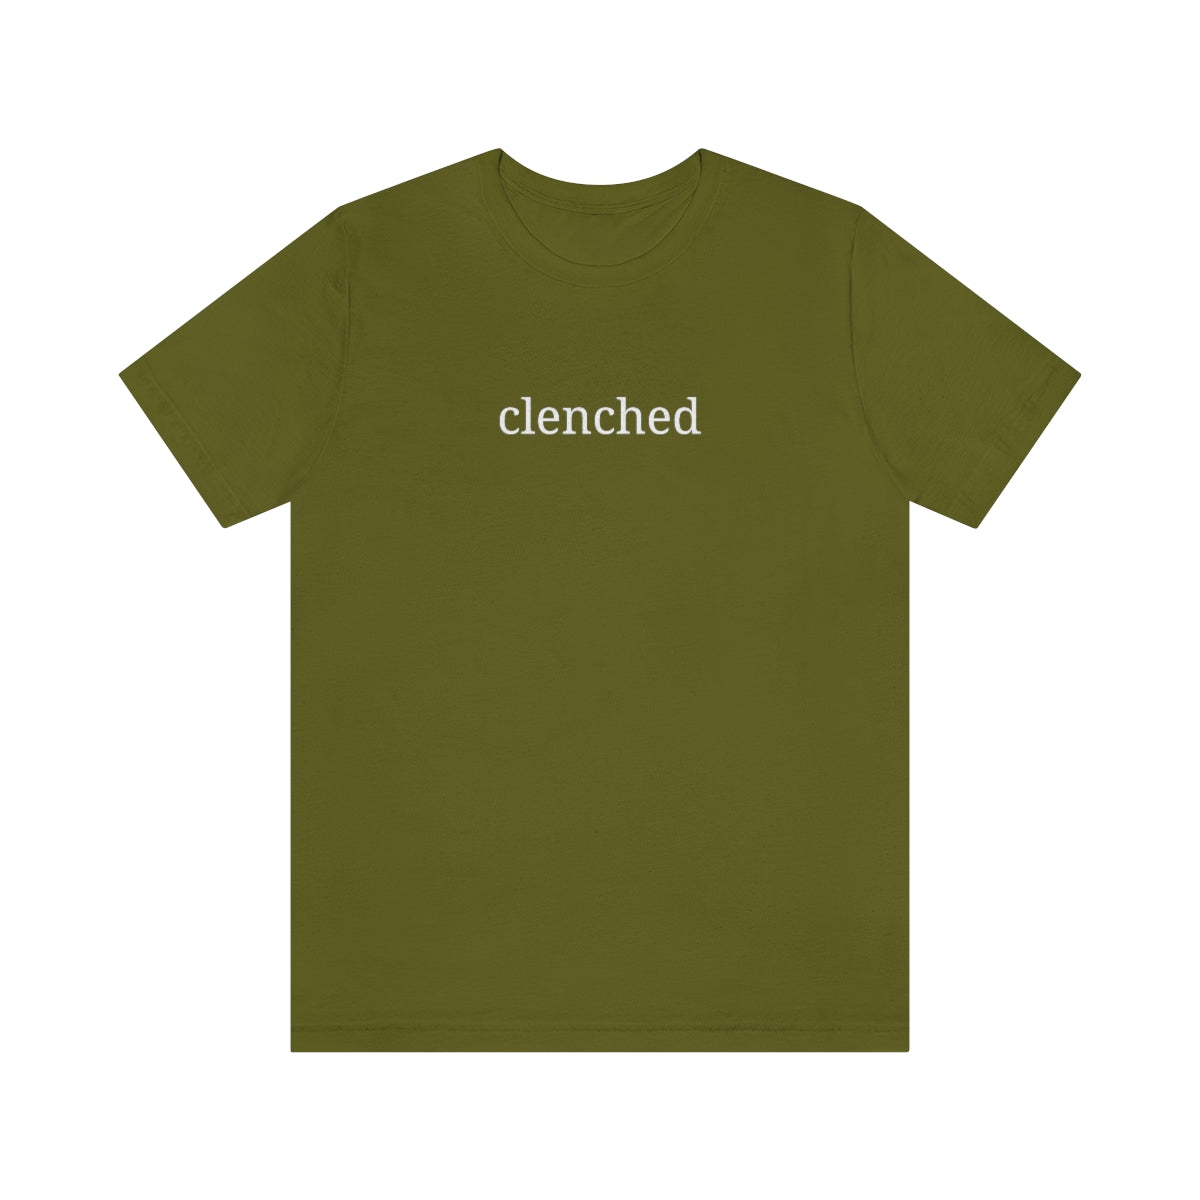 Clenched (unisex)